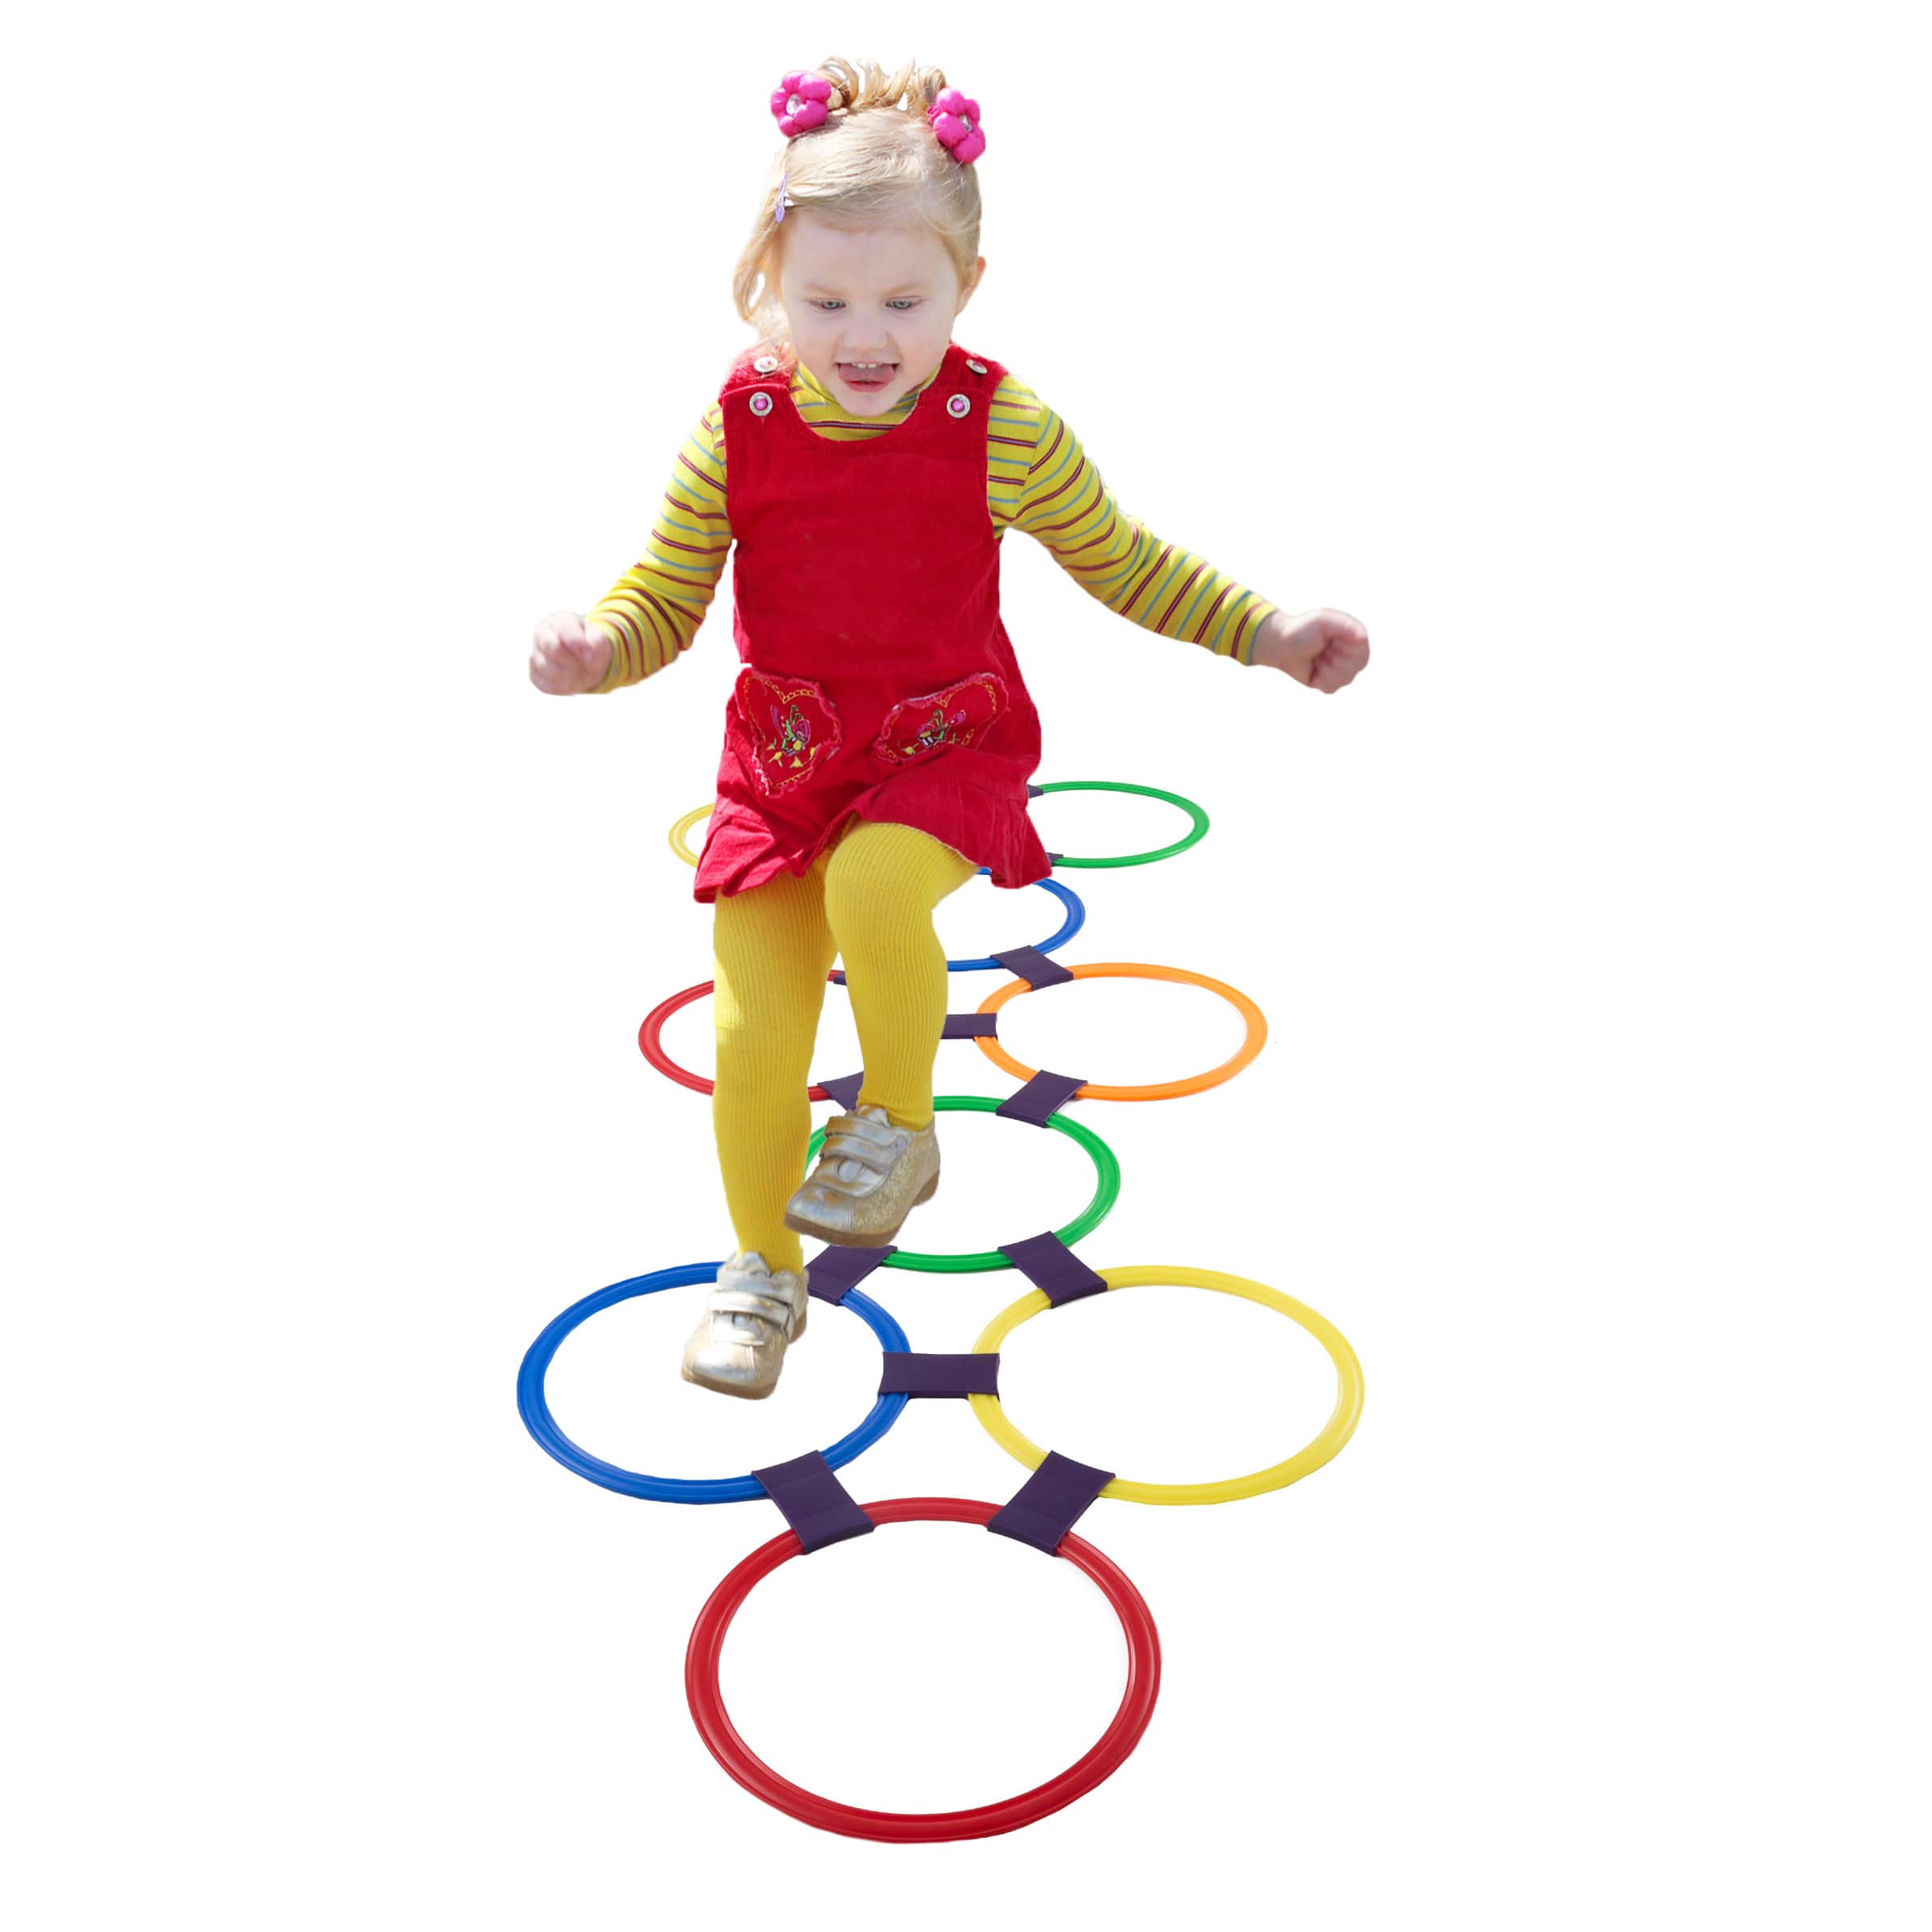 Toy Time Hopscotch Ring Game